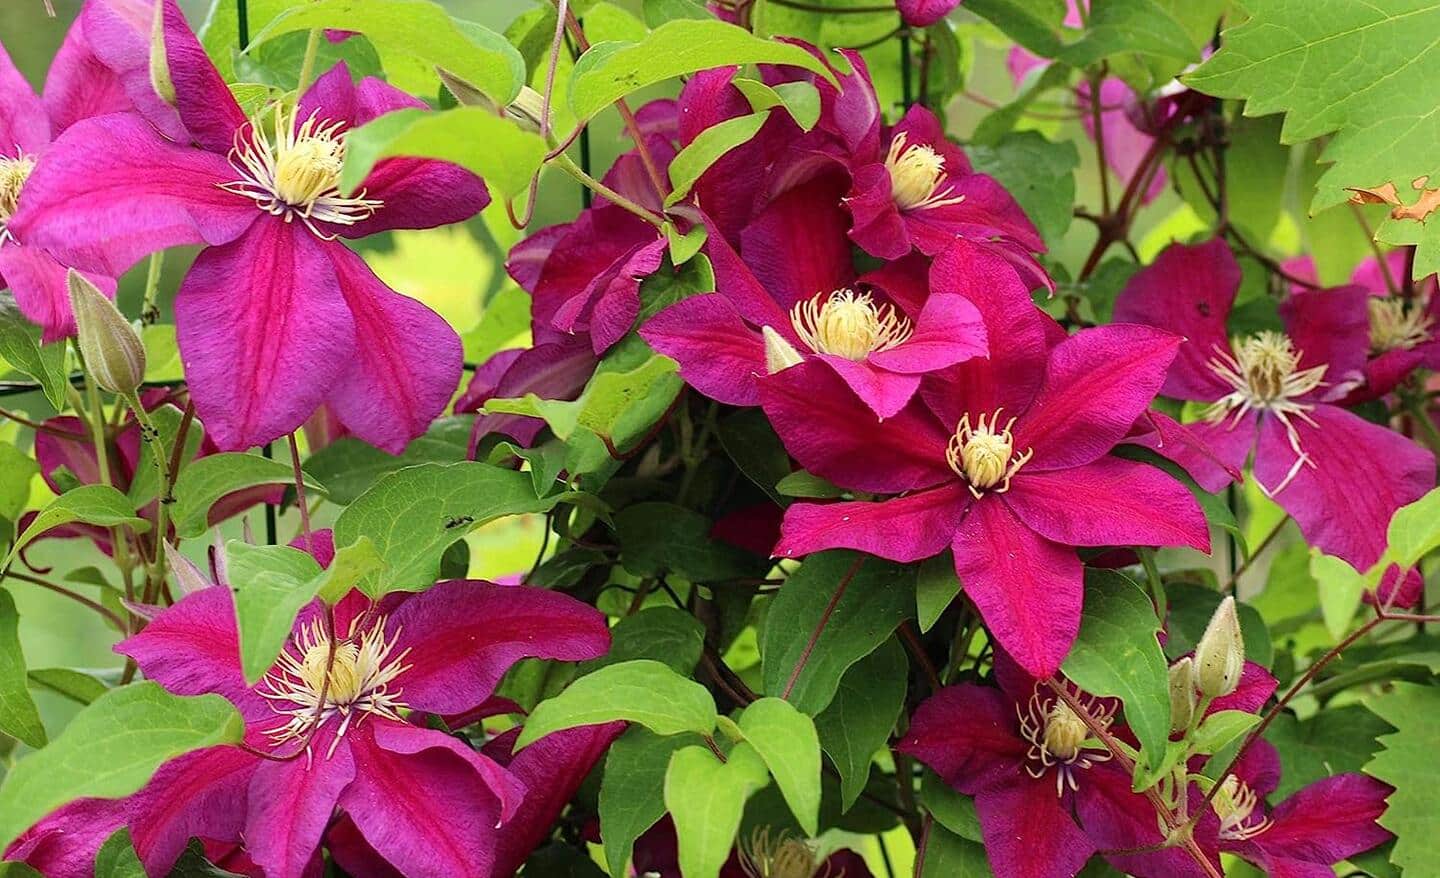 Clematis flowers on a vine growing in a garden